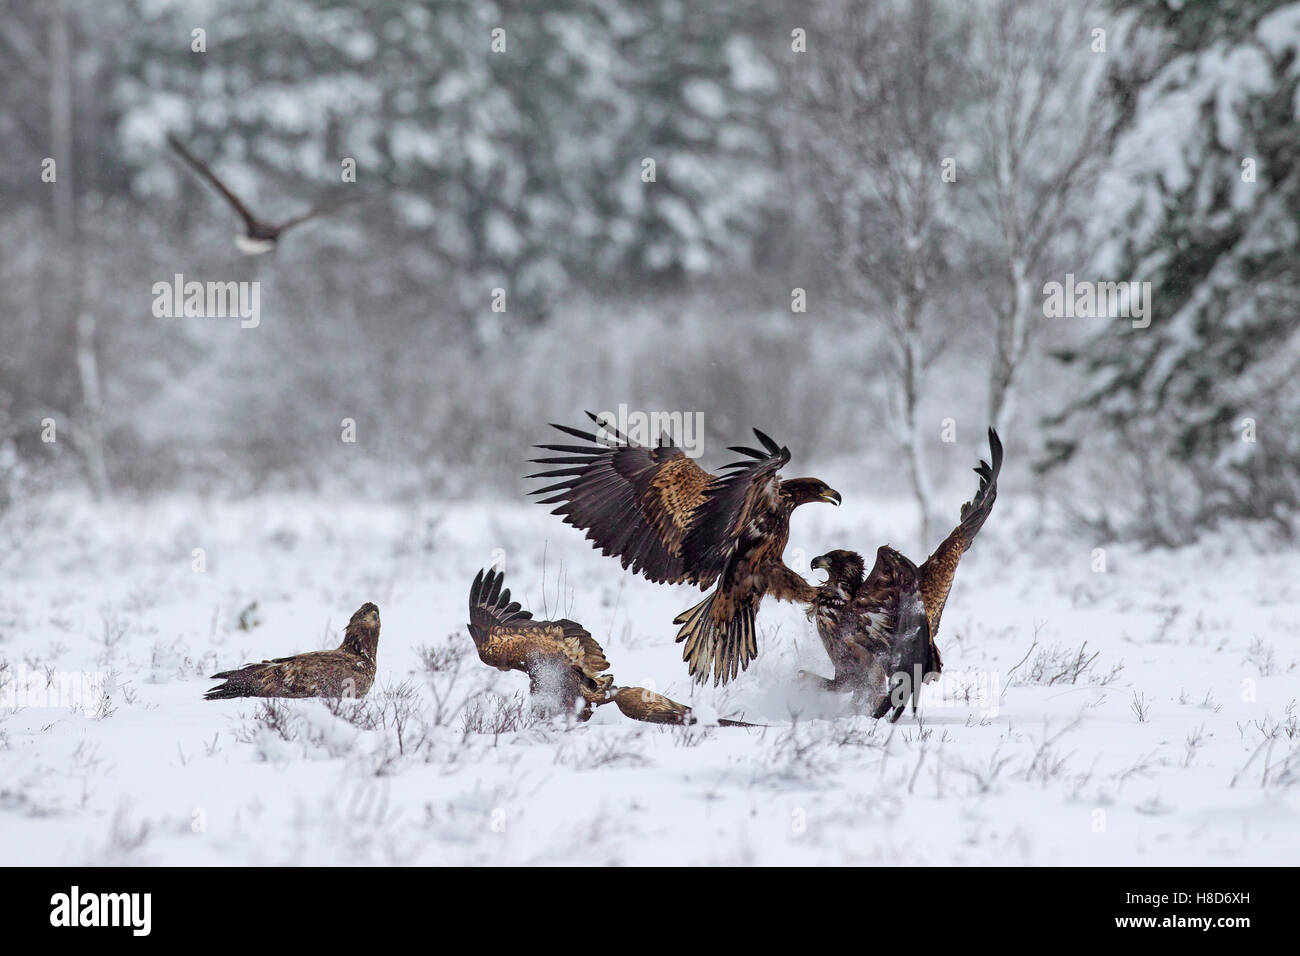 Two white-tailed eagles / white-tailed sea eagles / ernes (Haliaeetus albicilla) fighting among group in the snow in winter Stock Photo